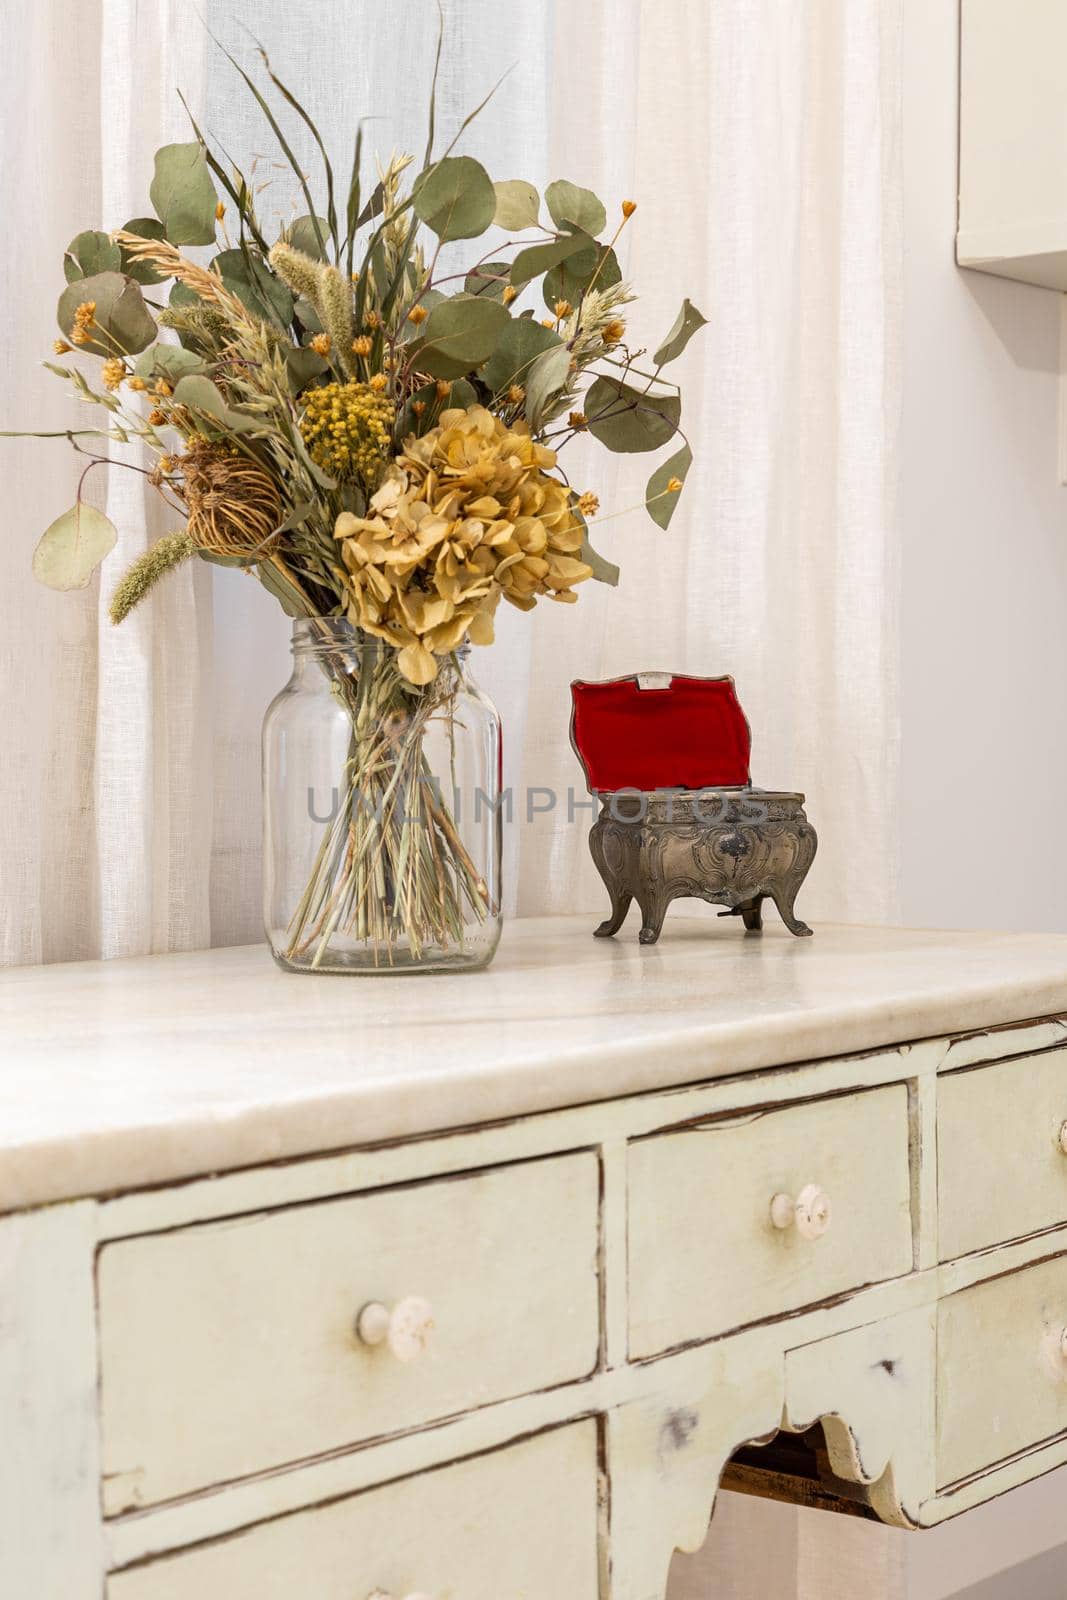 A bouquet of dried flowers and vintage jewelry box placed on retro style furniture